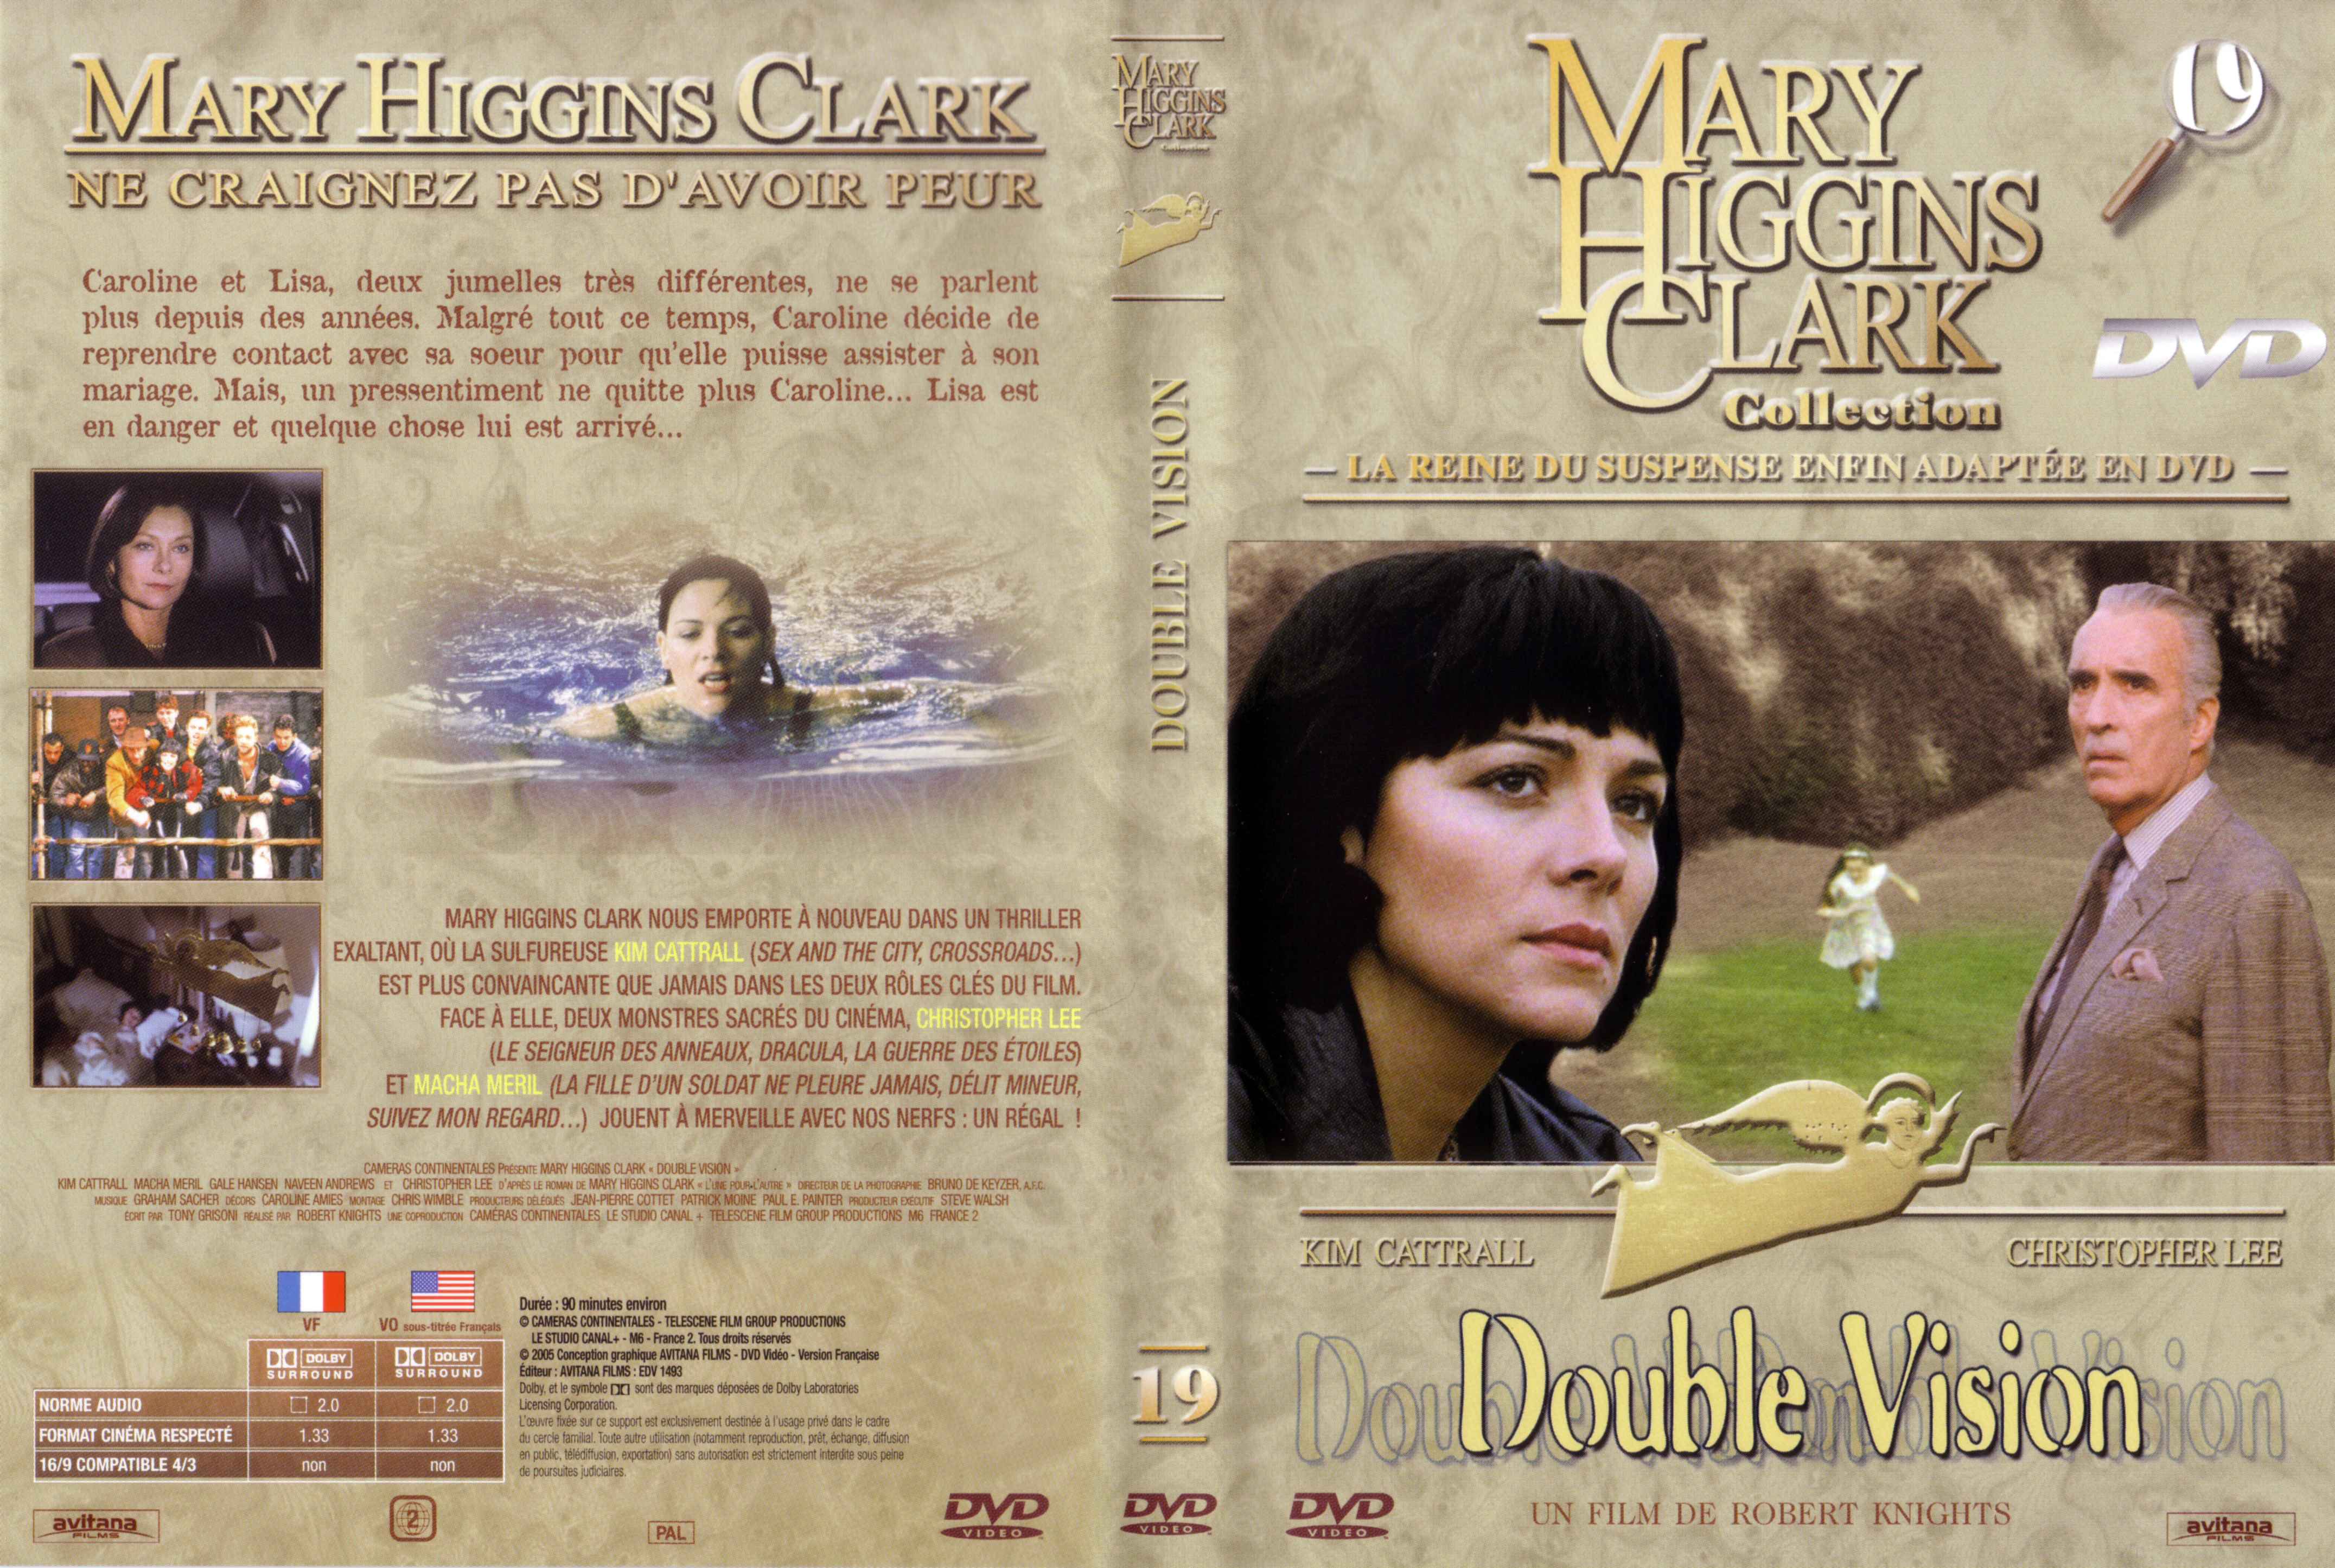 Jaquette DVD Mary Higgins Clark vol 19 - Double vision